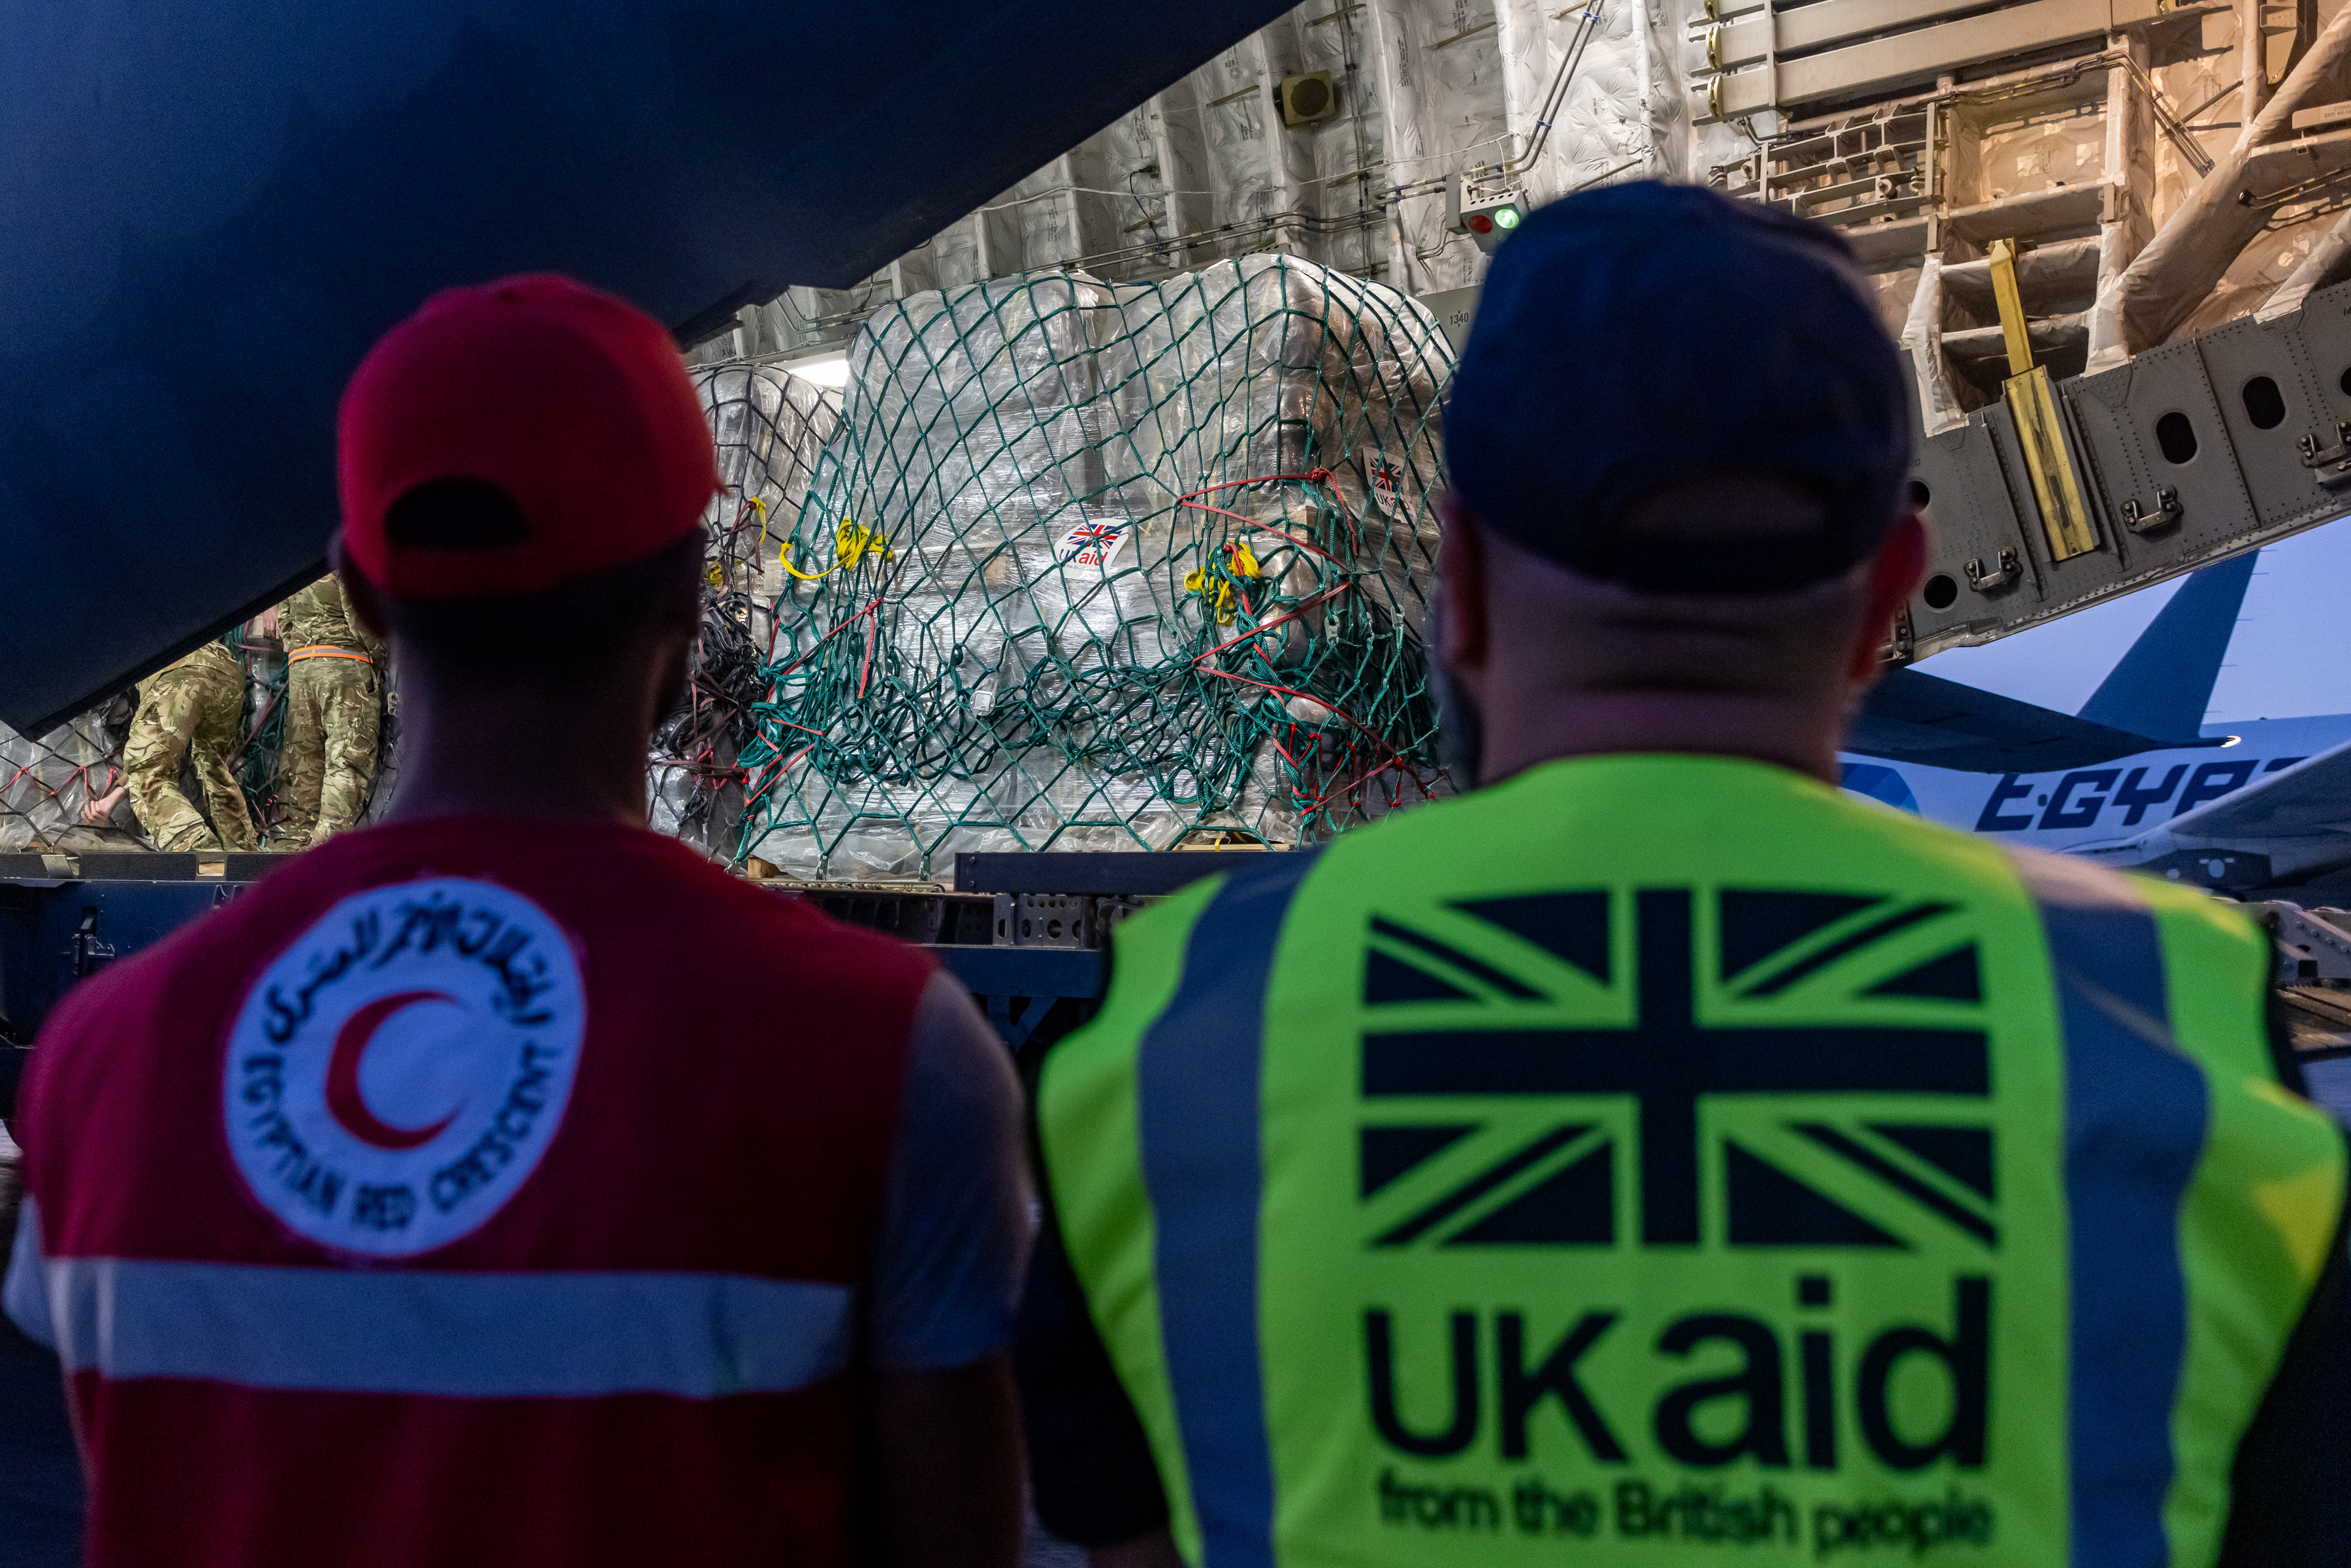 a UK aid person and Egyptian Red Crescent person watching as supplies are unloaded from the C-17 aircraft